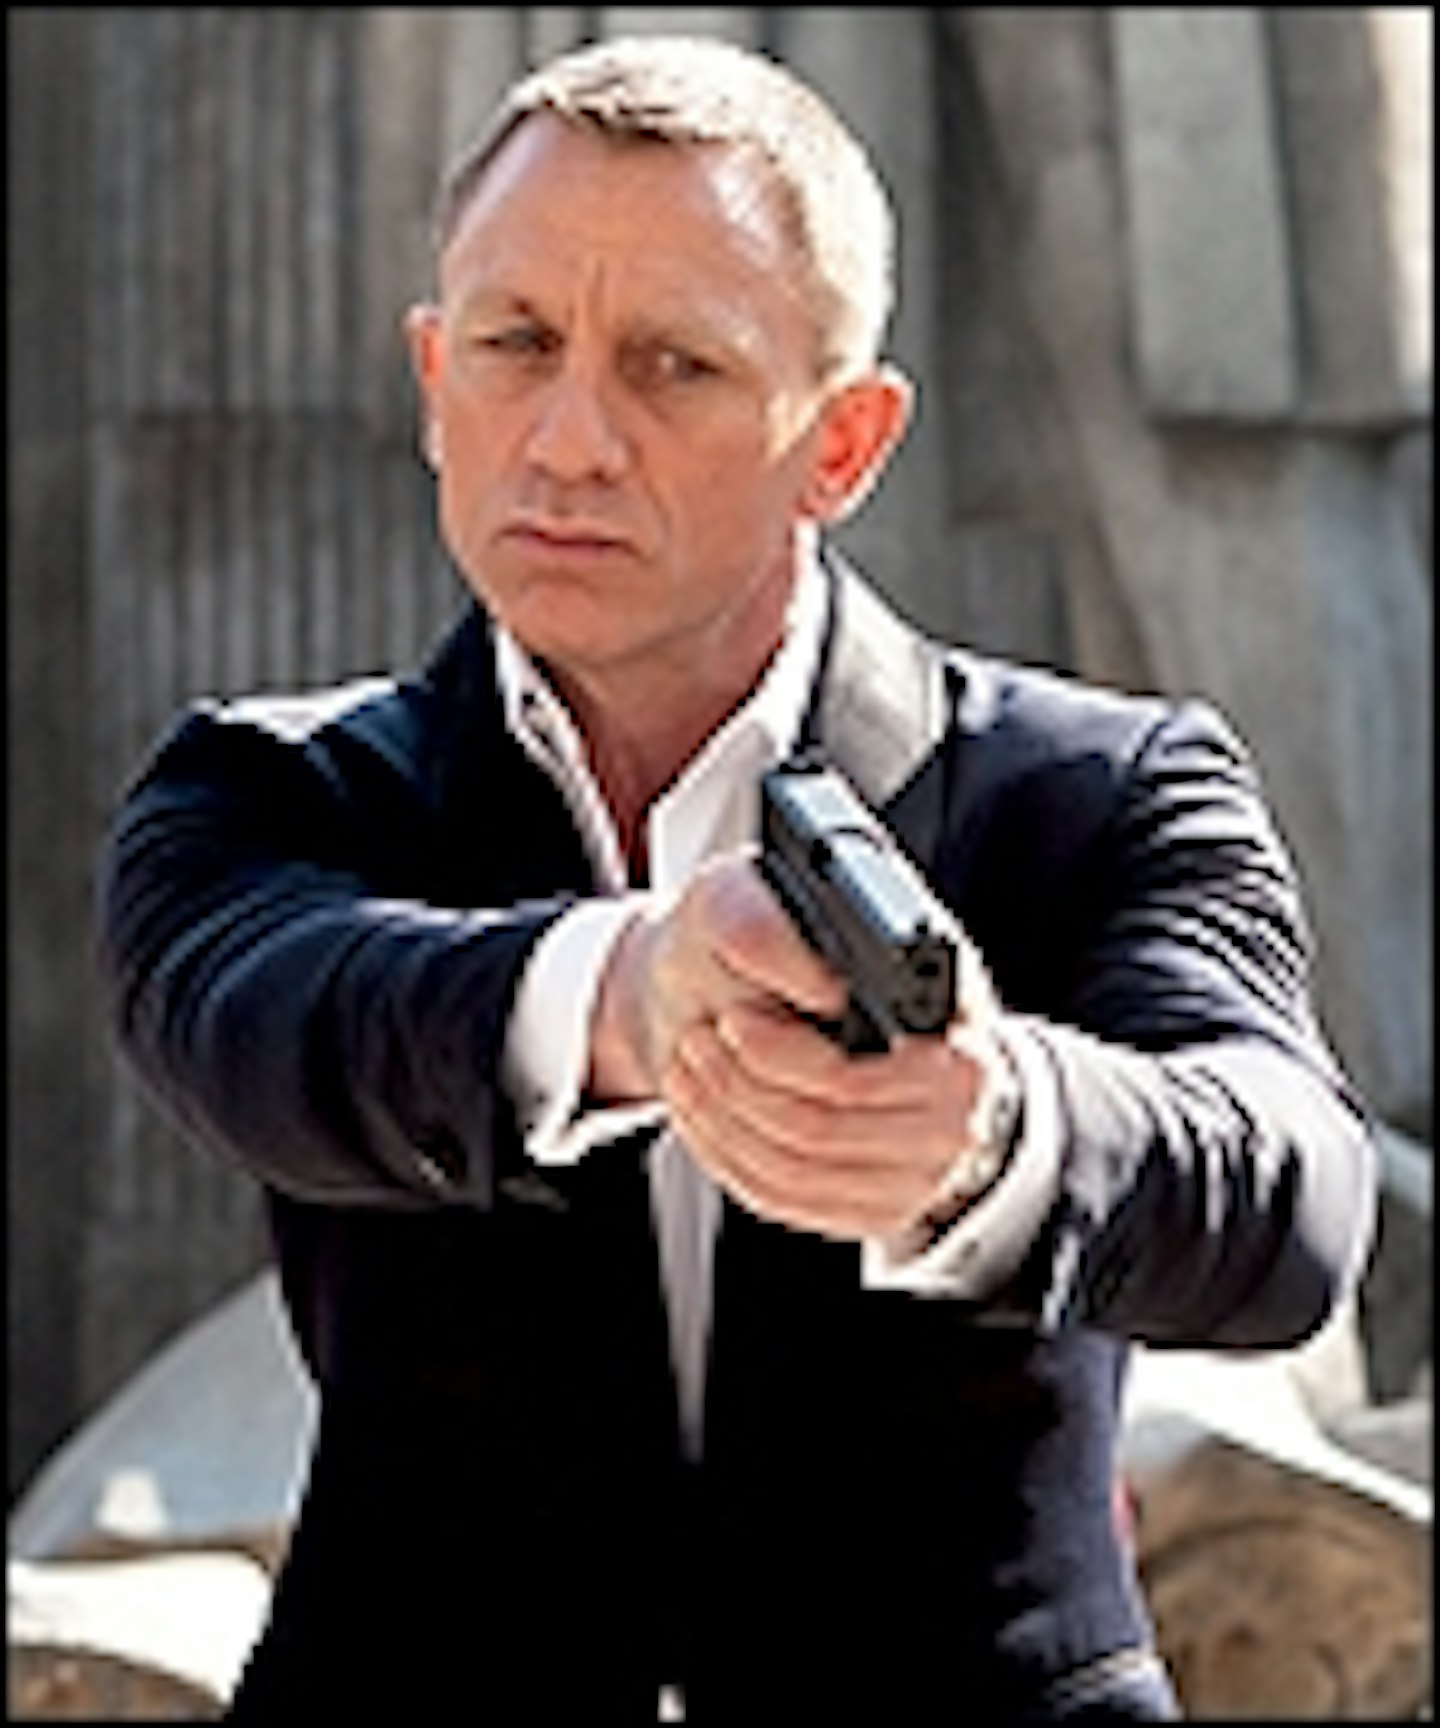 007 Minutes Of Skyfall